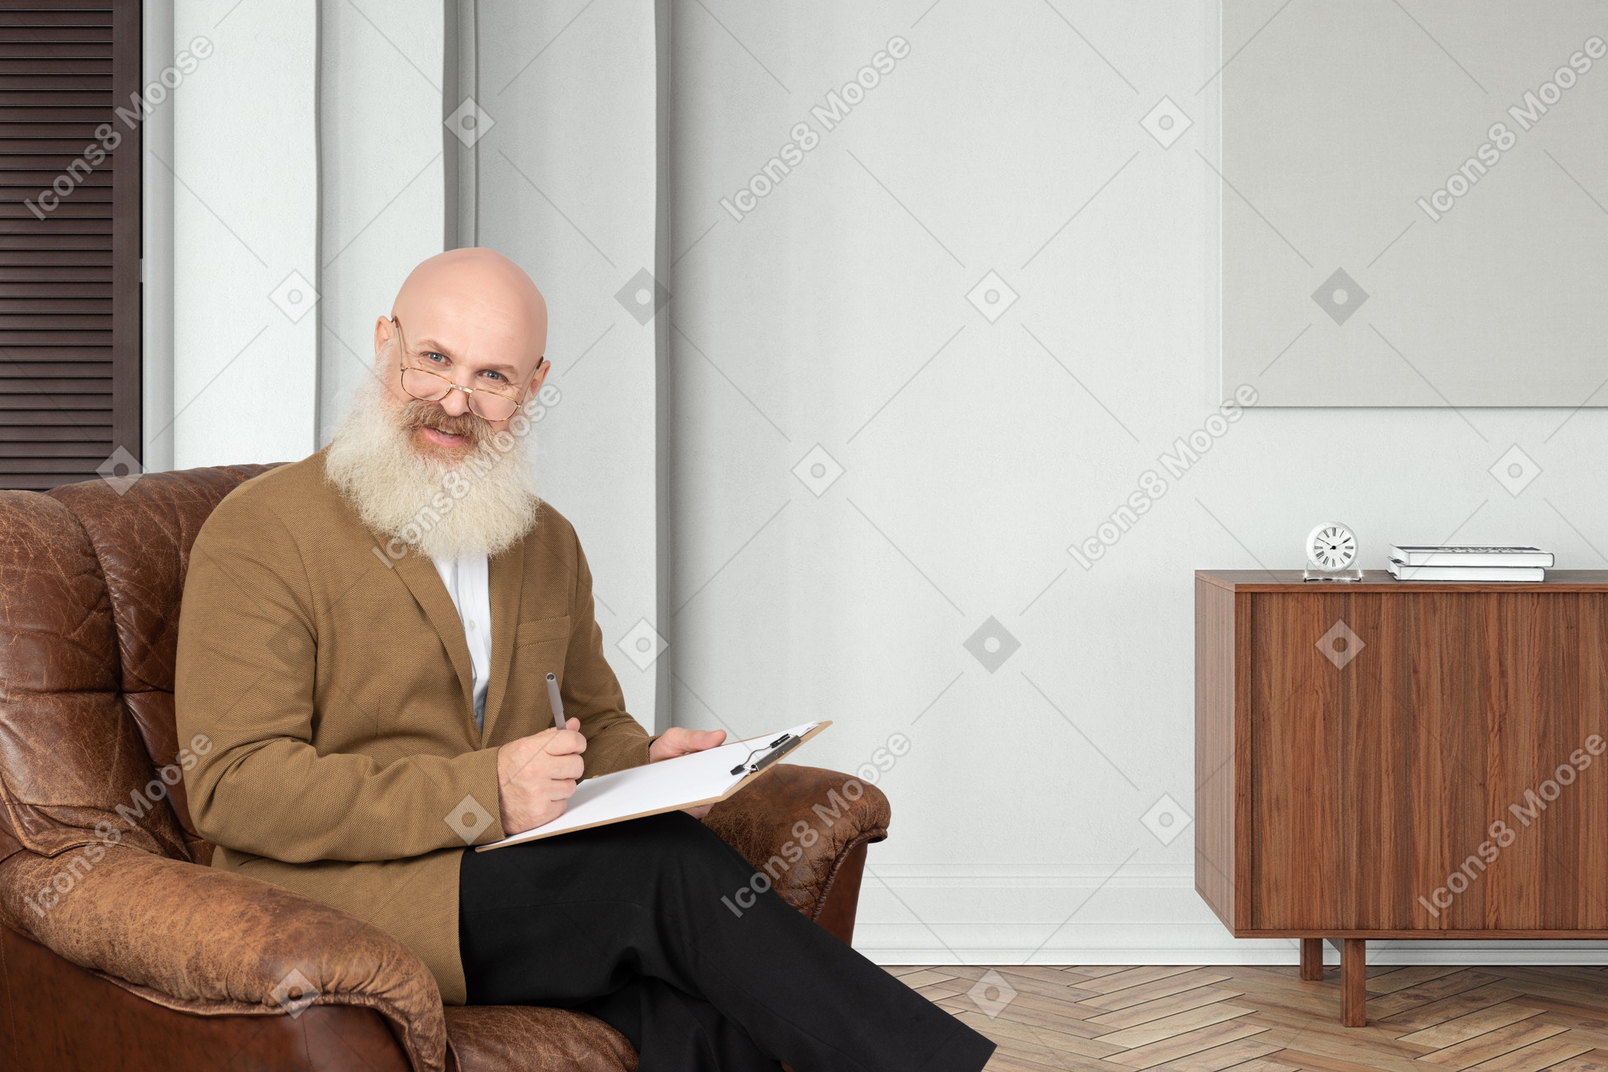 A man with a beard sitting in a chair and writing on a clipboard